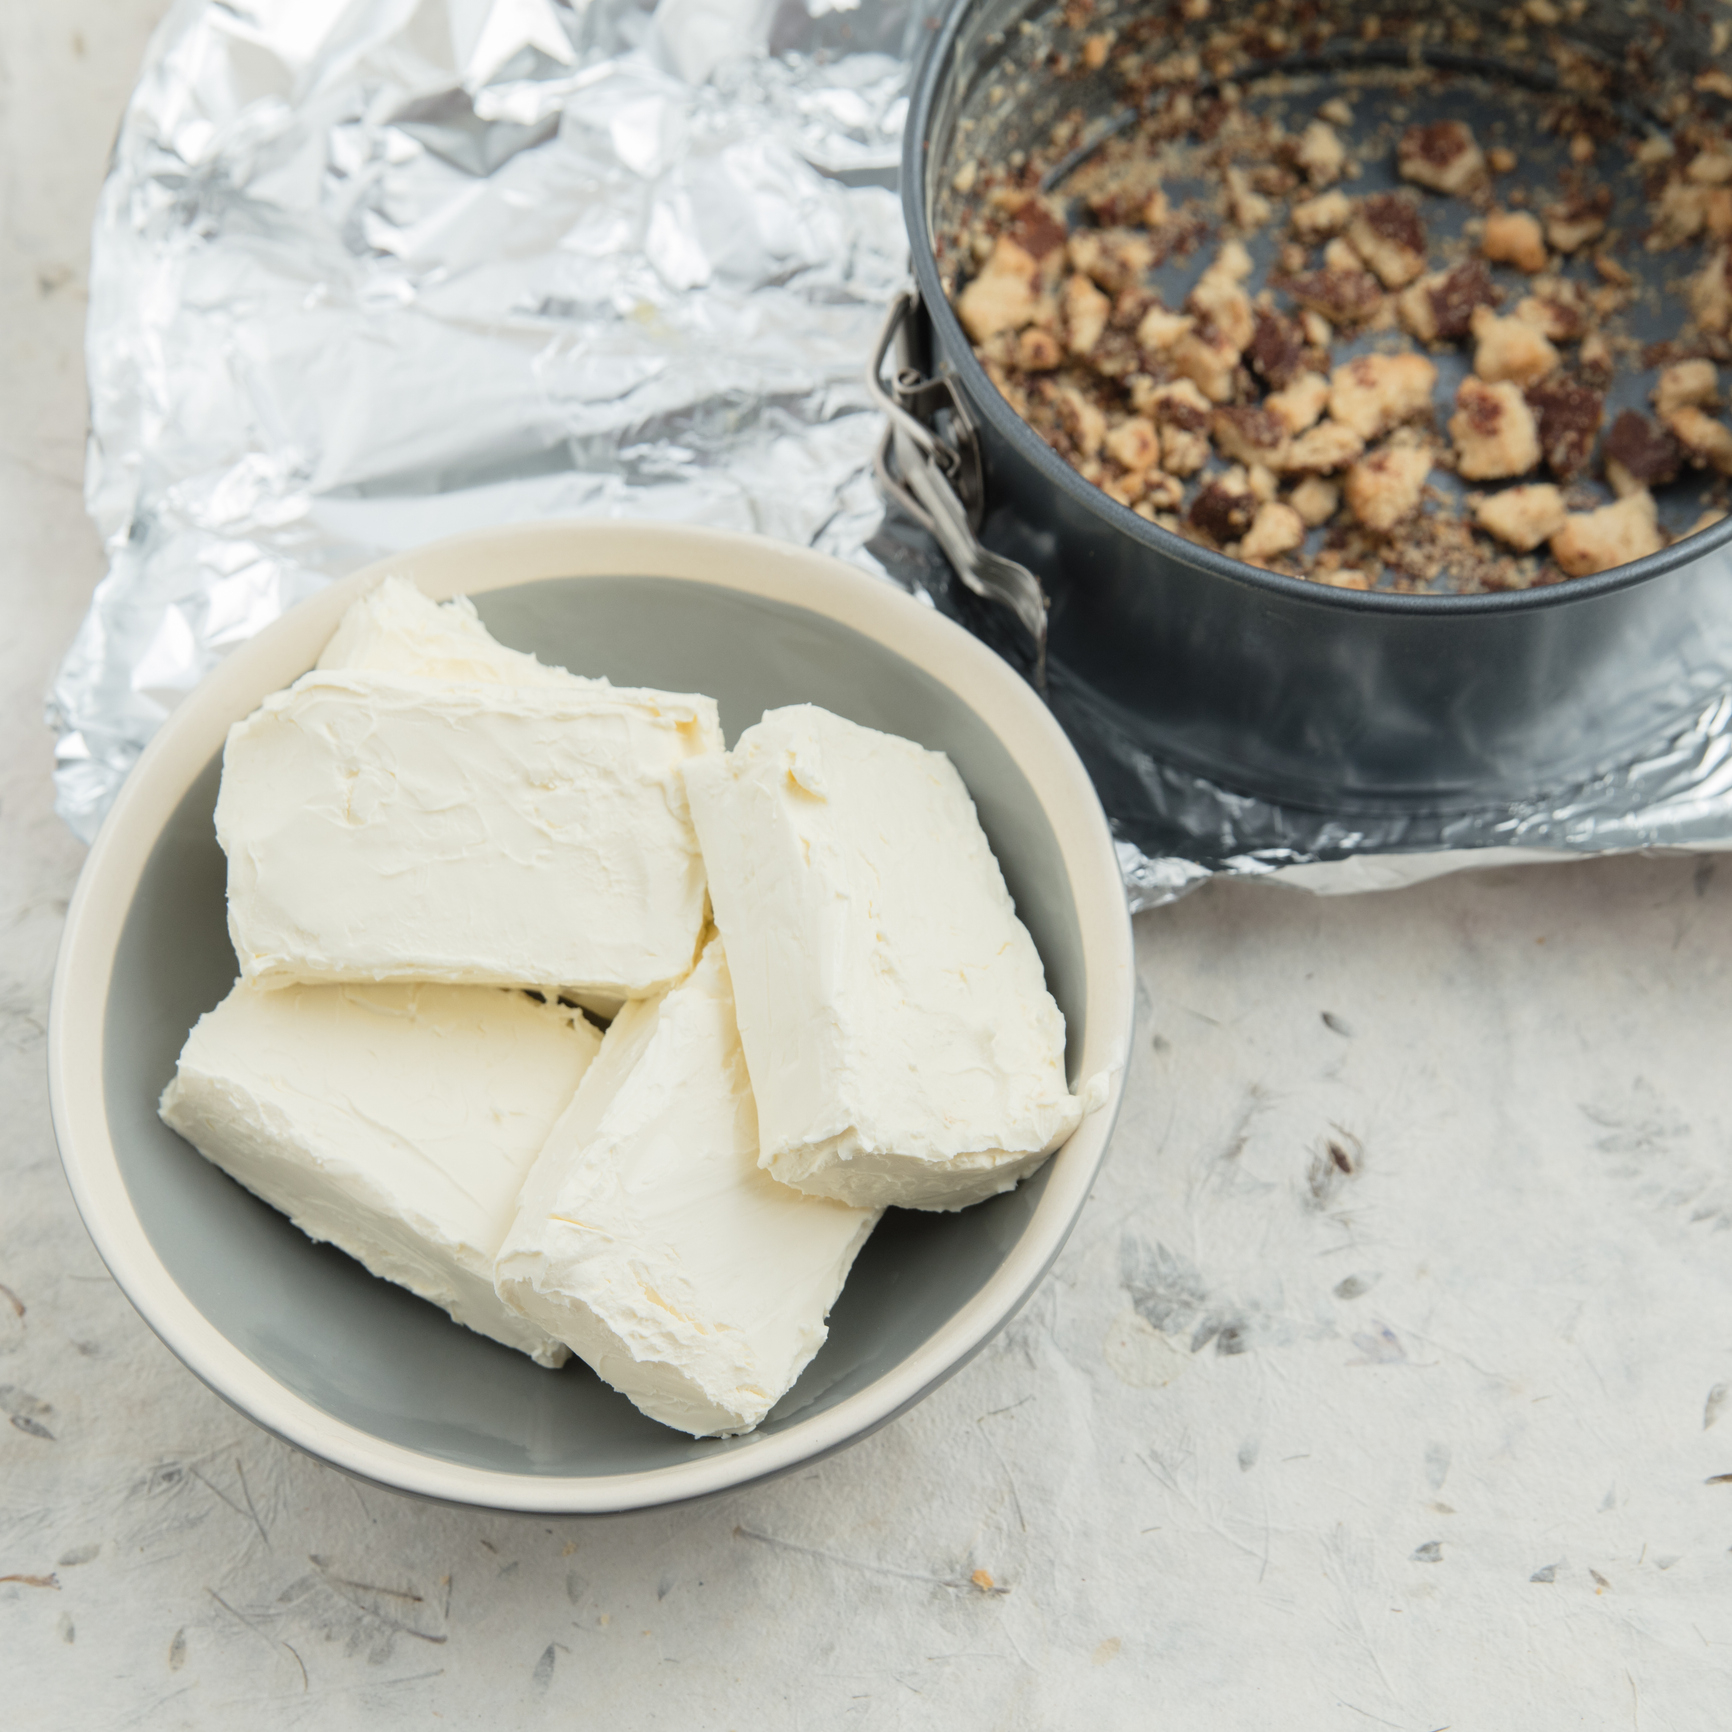 A bowl of feta cheese beside a pan of cooked food